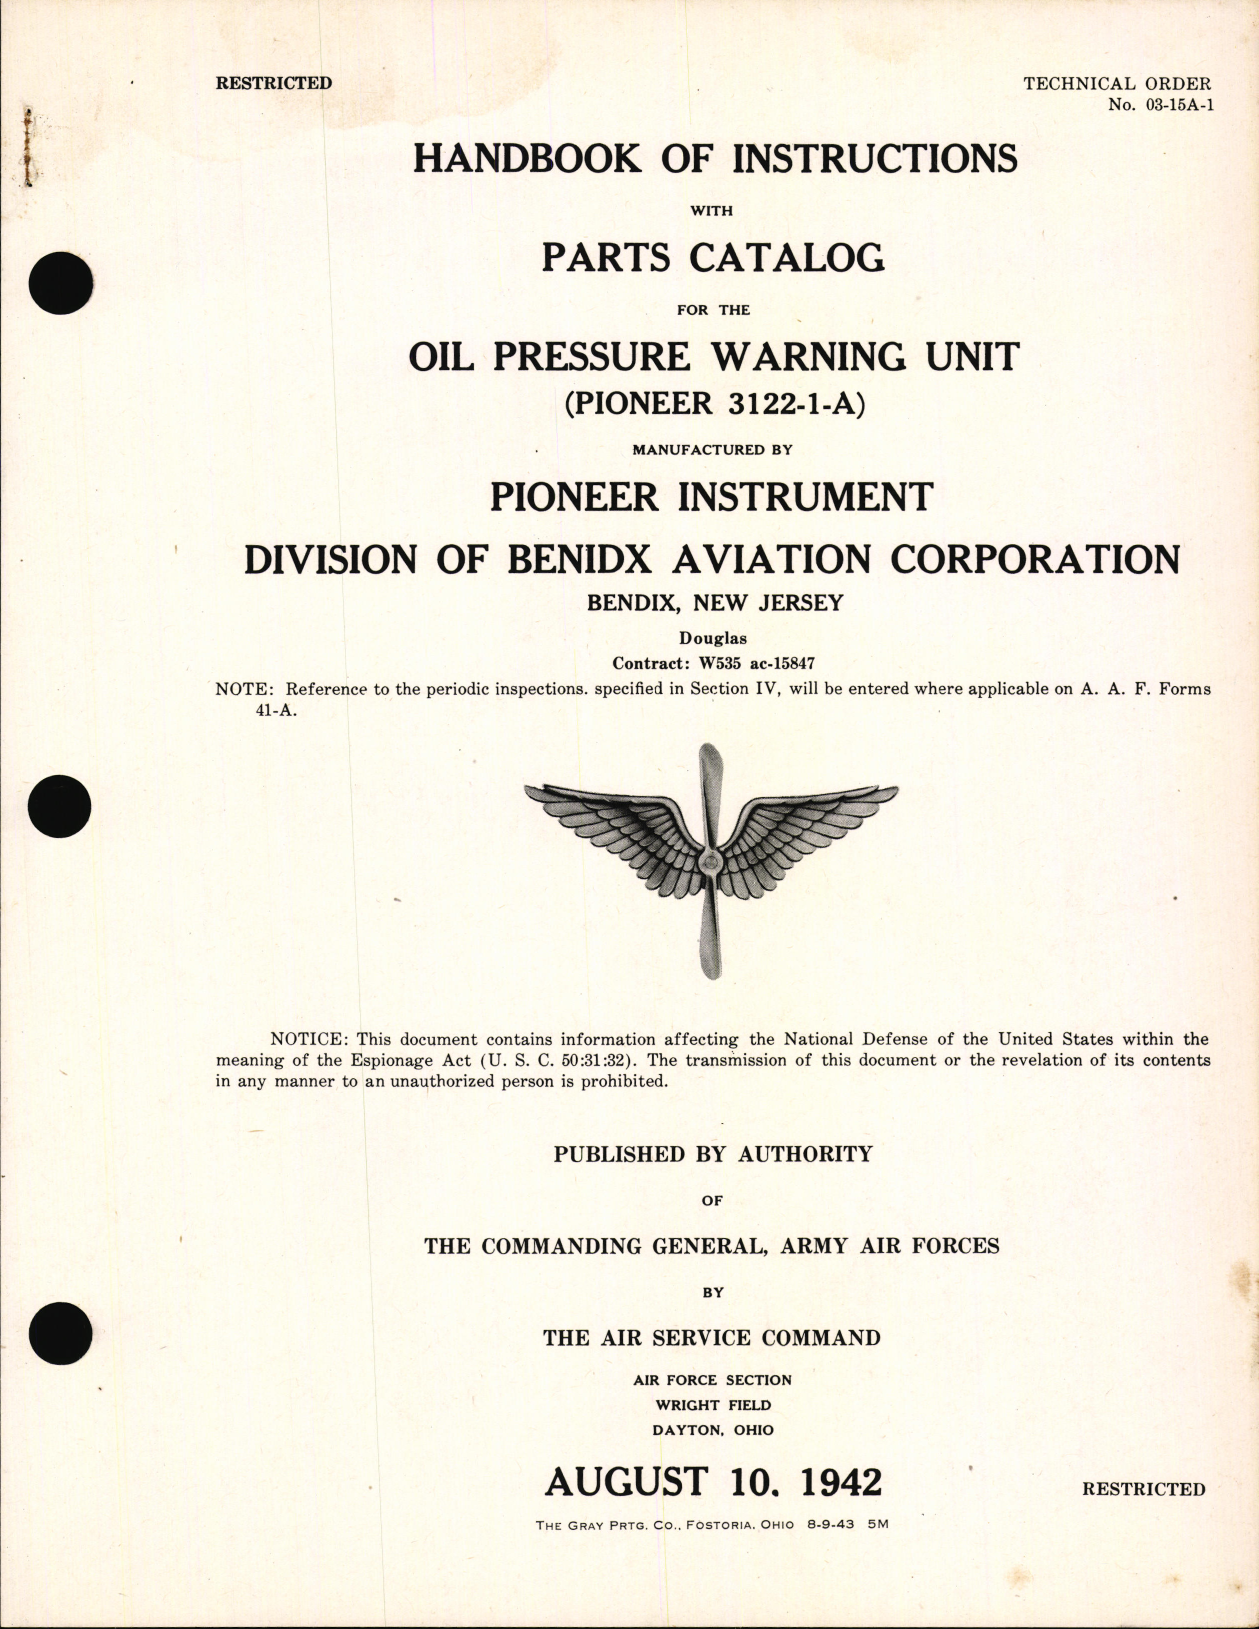 Sample page 1 from AirCorps Library document: Handbook of Instructions with Parts Catalog for Oil Pressure Warning Unit